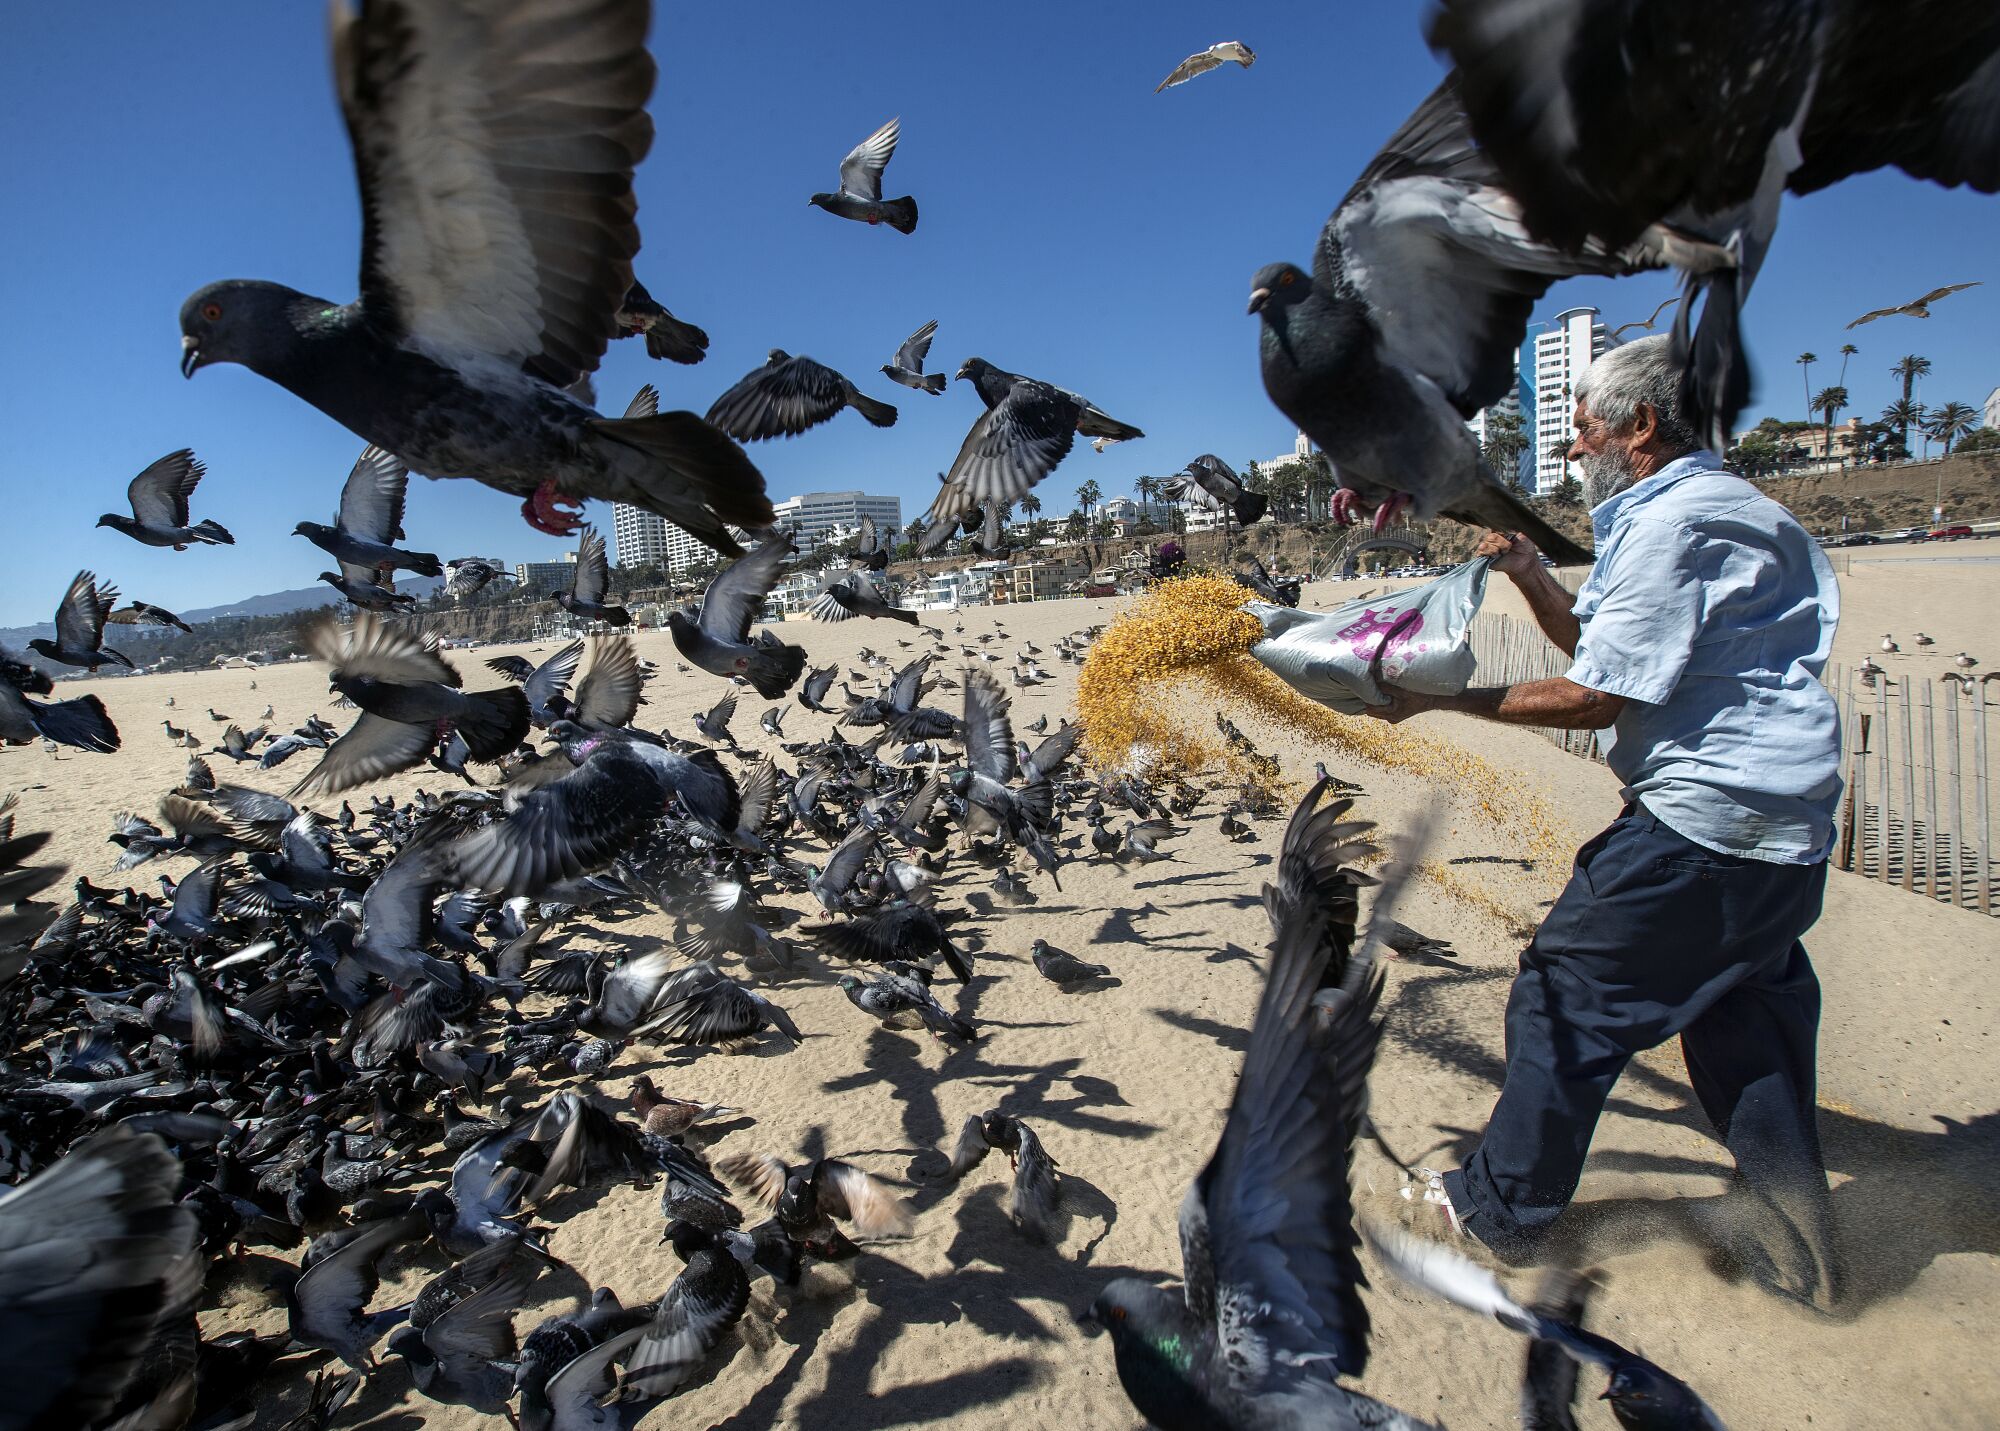 Augustine Hurtado tosses scratch feed to the pigeons at Santa Monica State Beach.